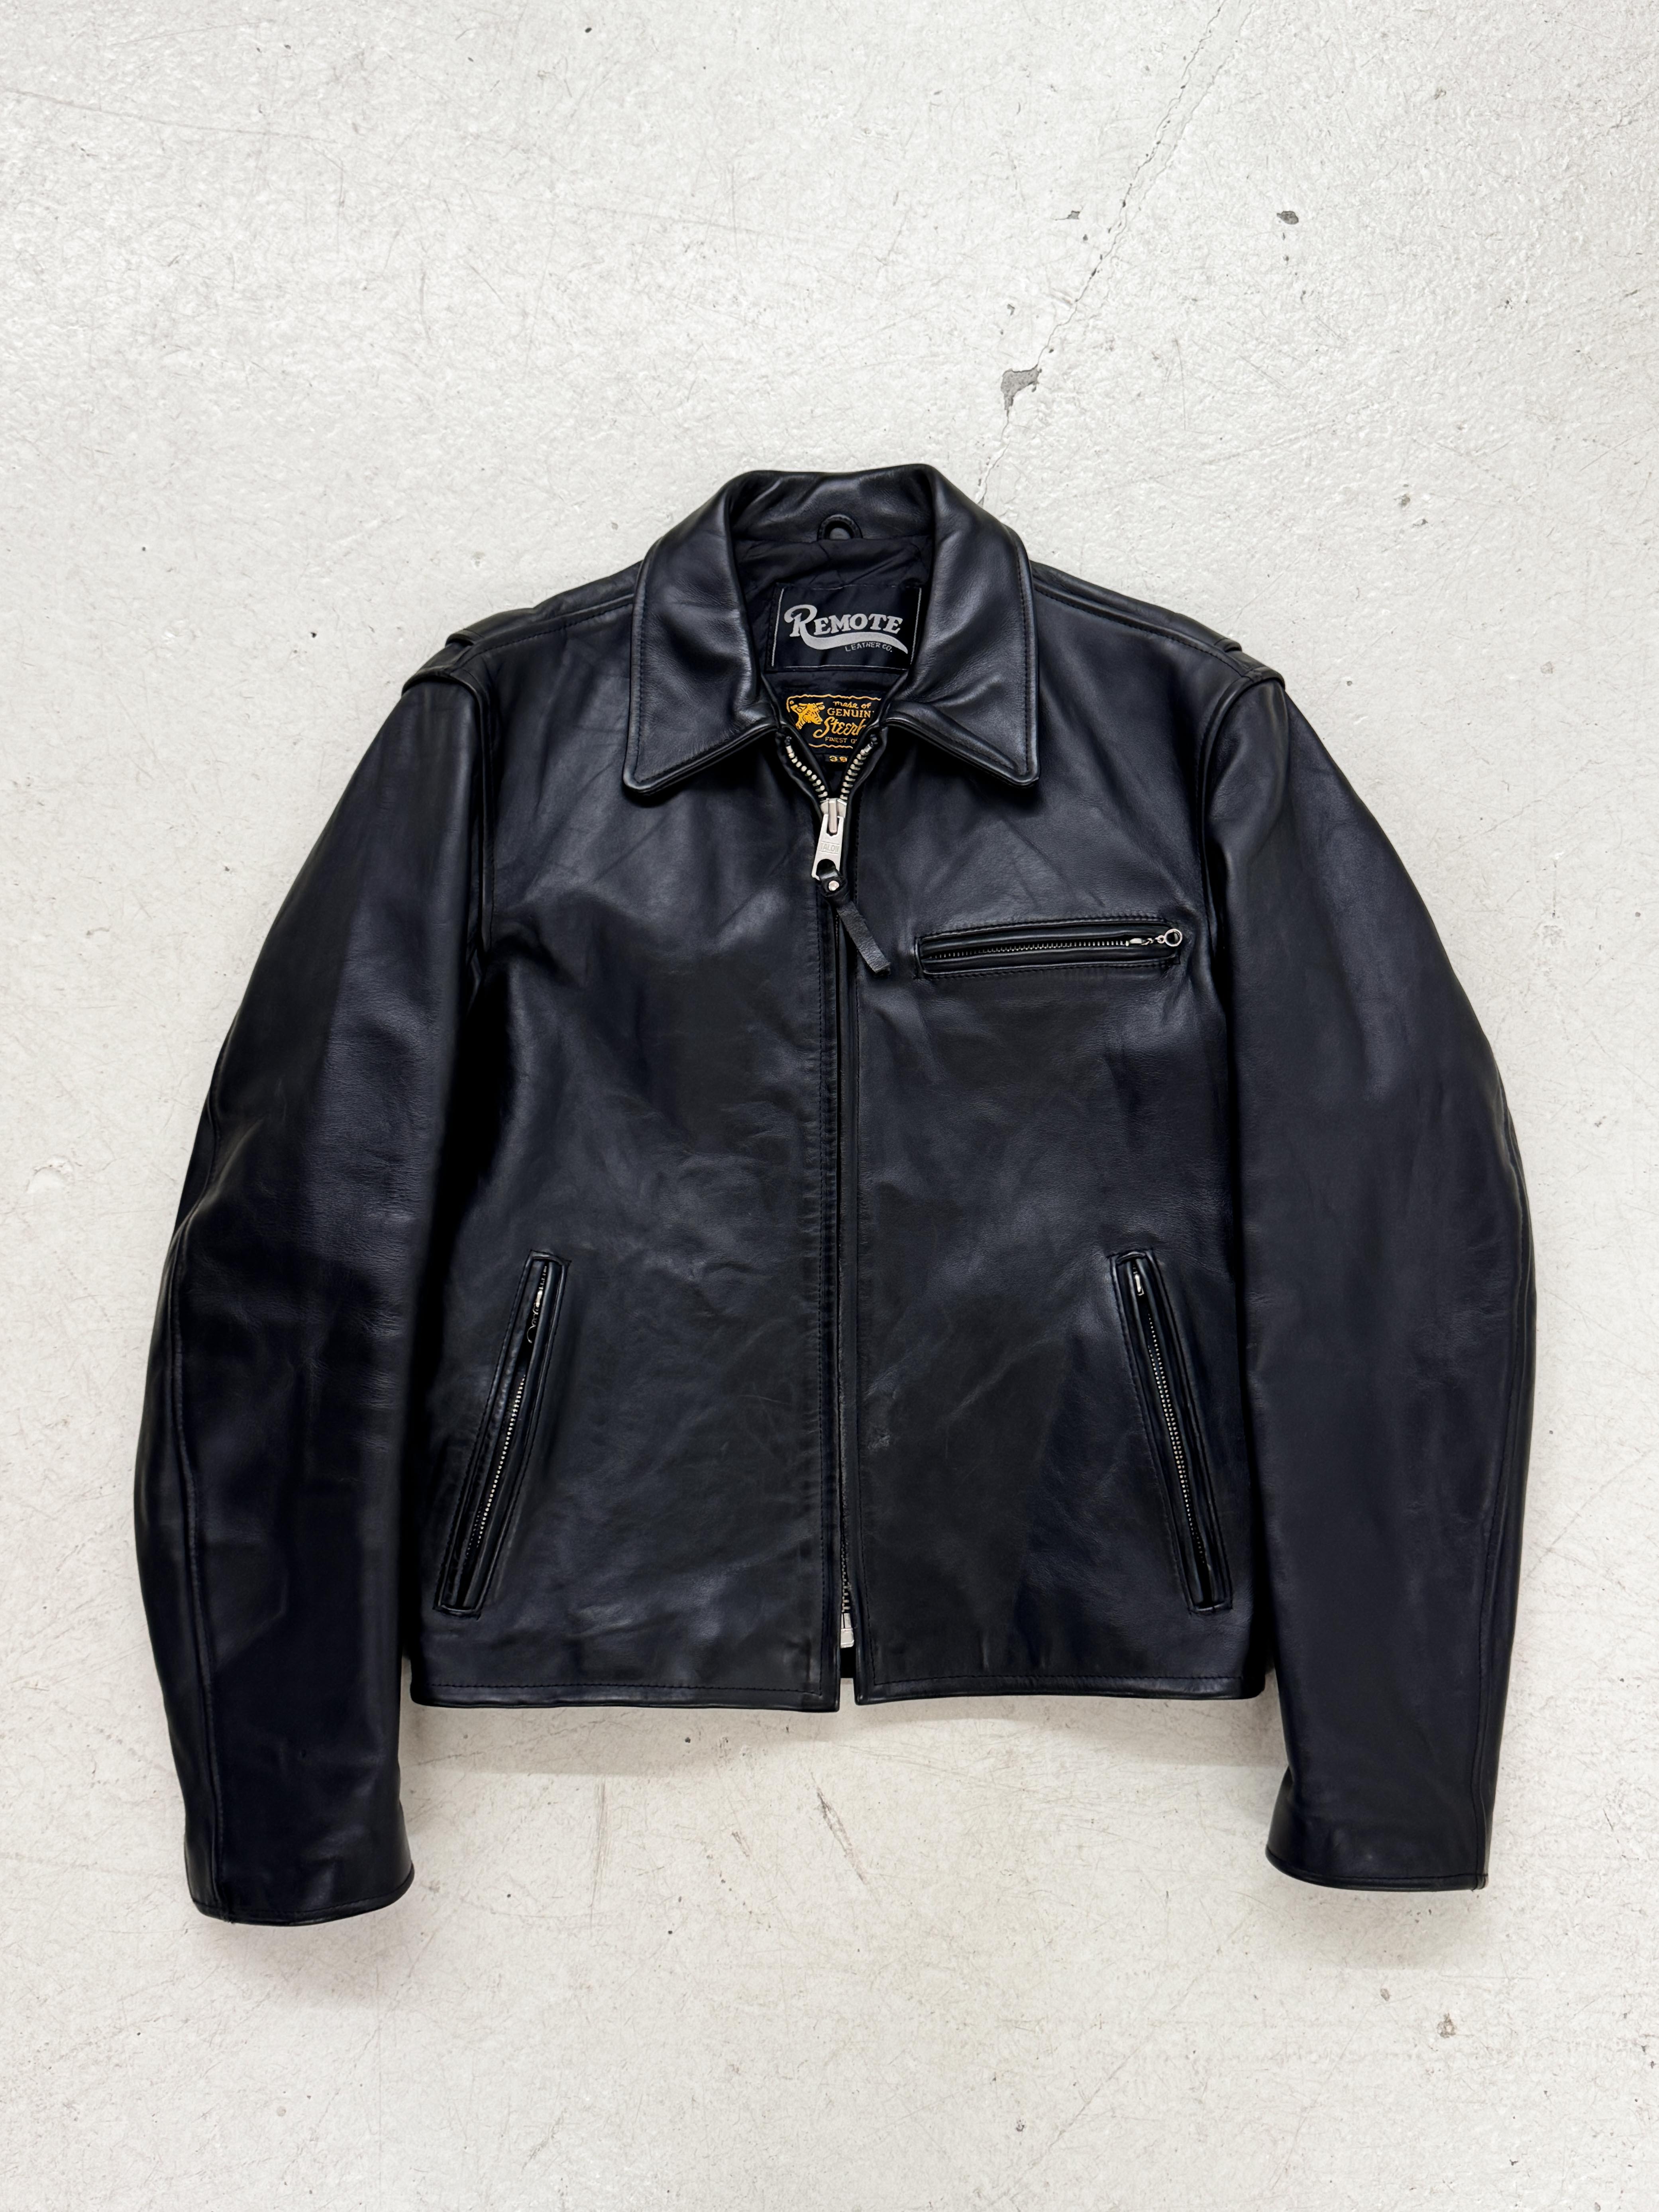 Remote leather jacket